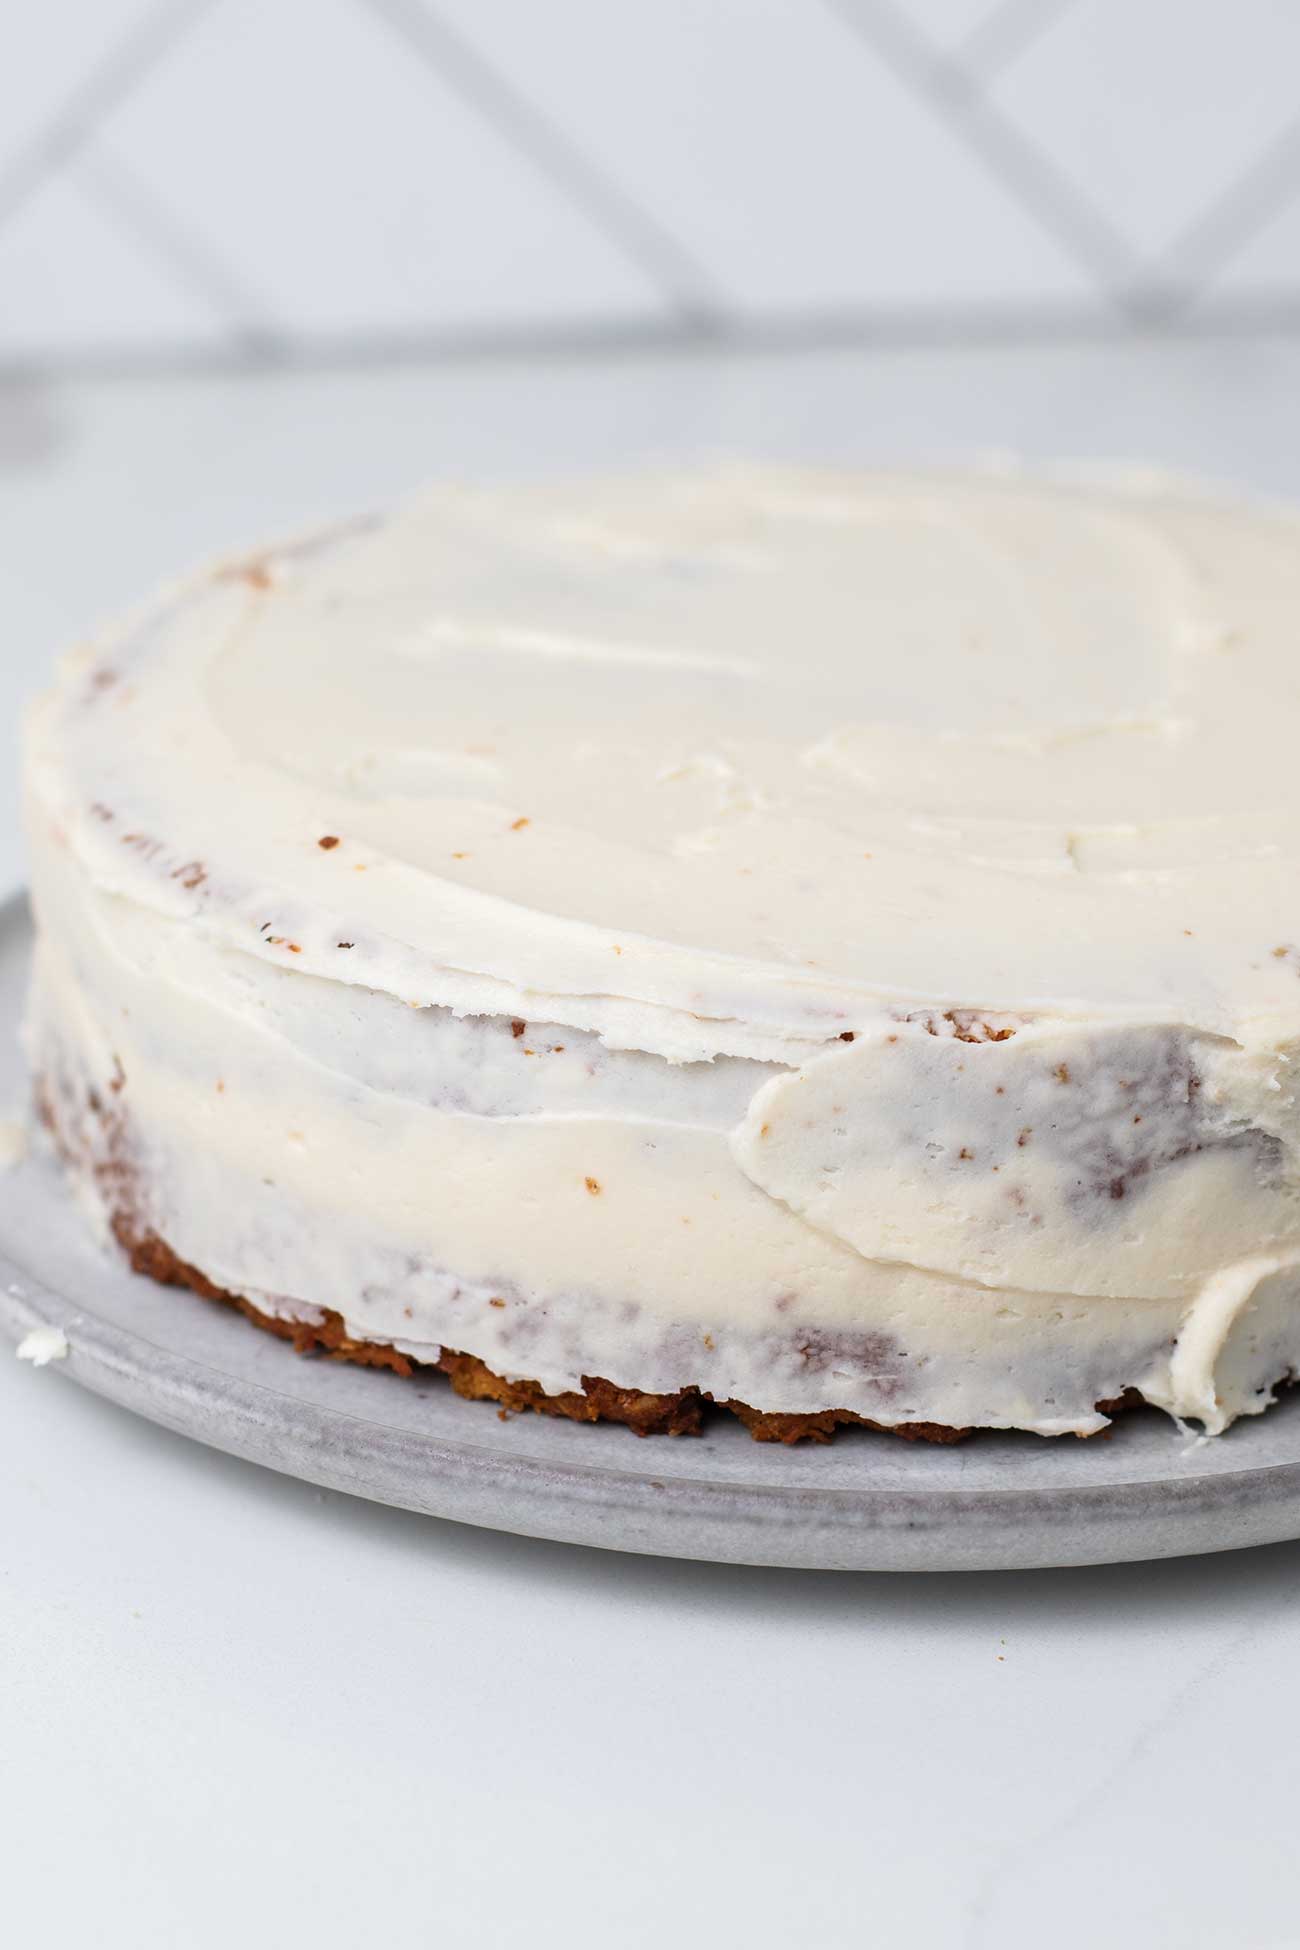 The second layer of carrot take added to the top with a very thin layer of frosting on the cake.